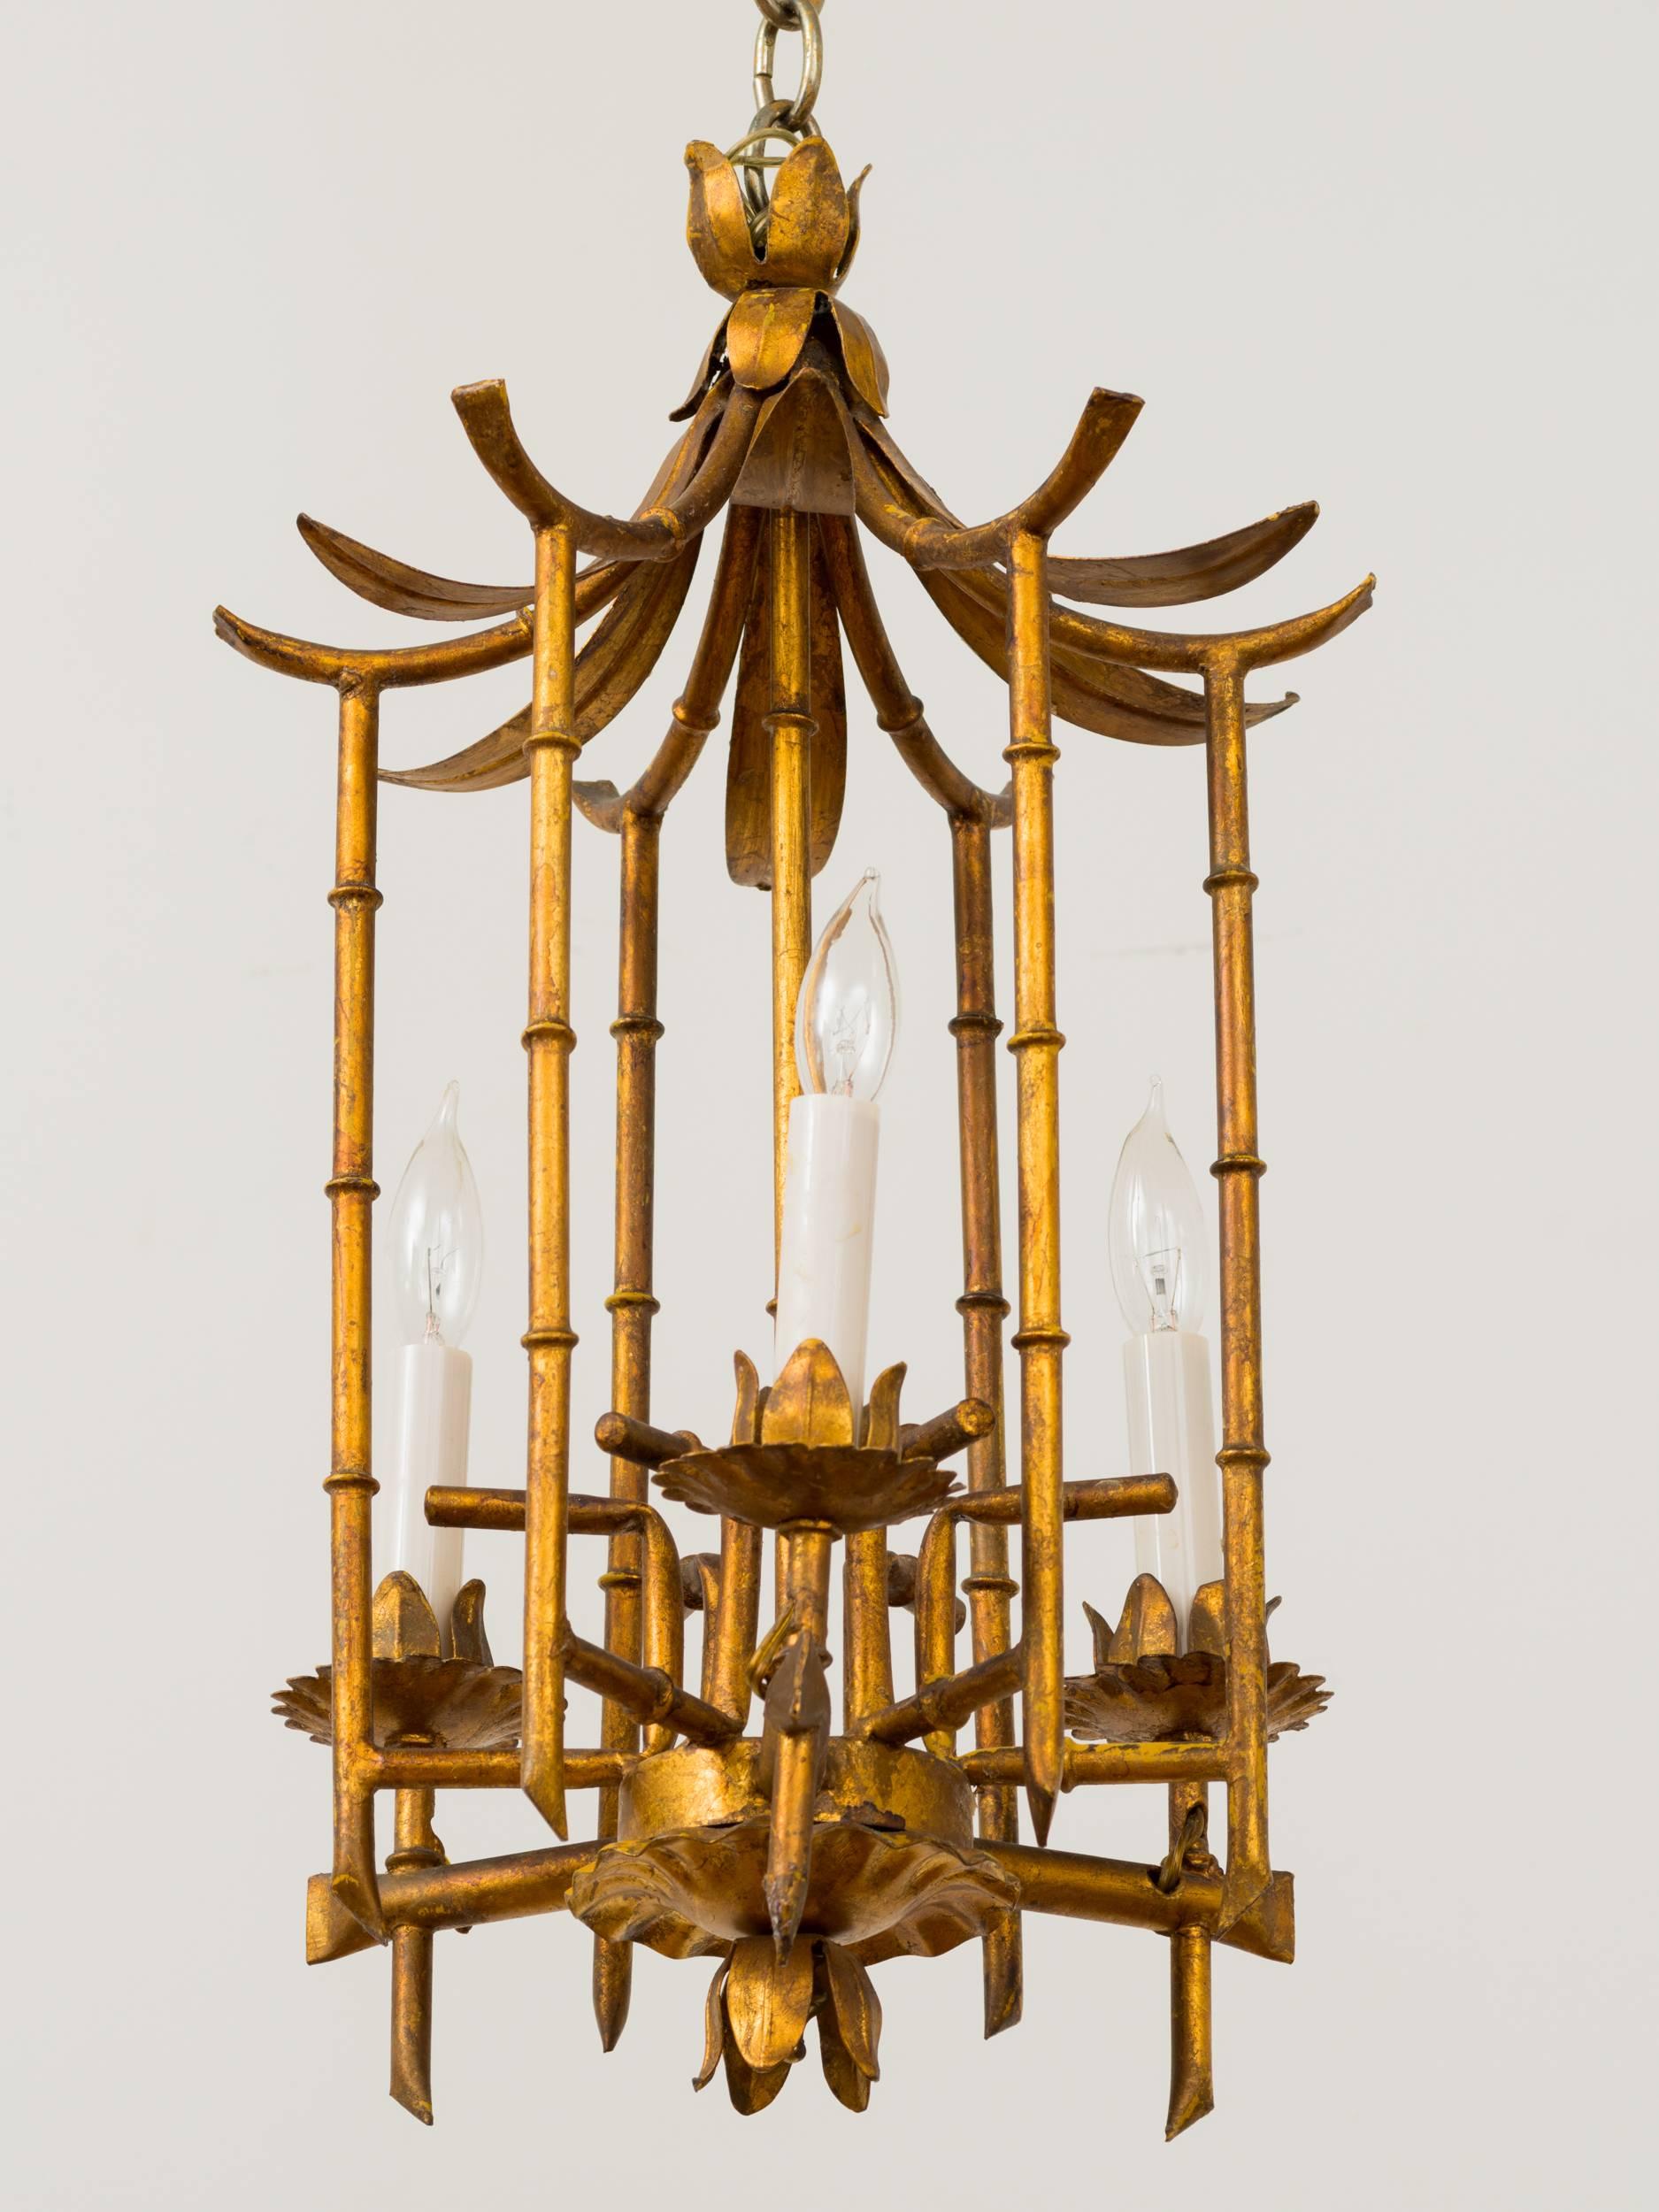 Italian faux bamboo pagoda shape chandelier has distressed faux gilt painted finish. Gilt sunburst shape ceiling cap is original. Height of fixture is adjustable by adding or removing link chain. 

  